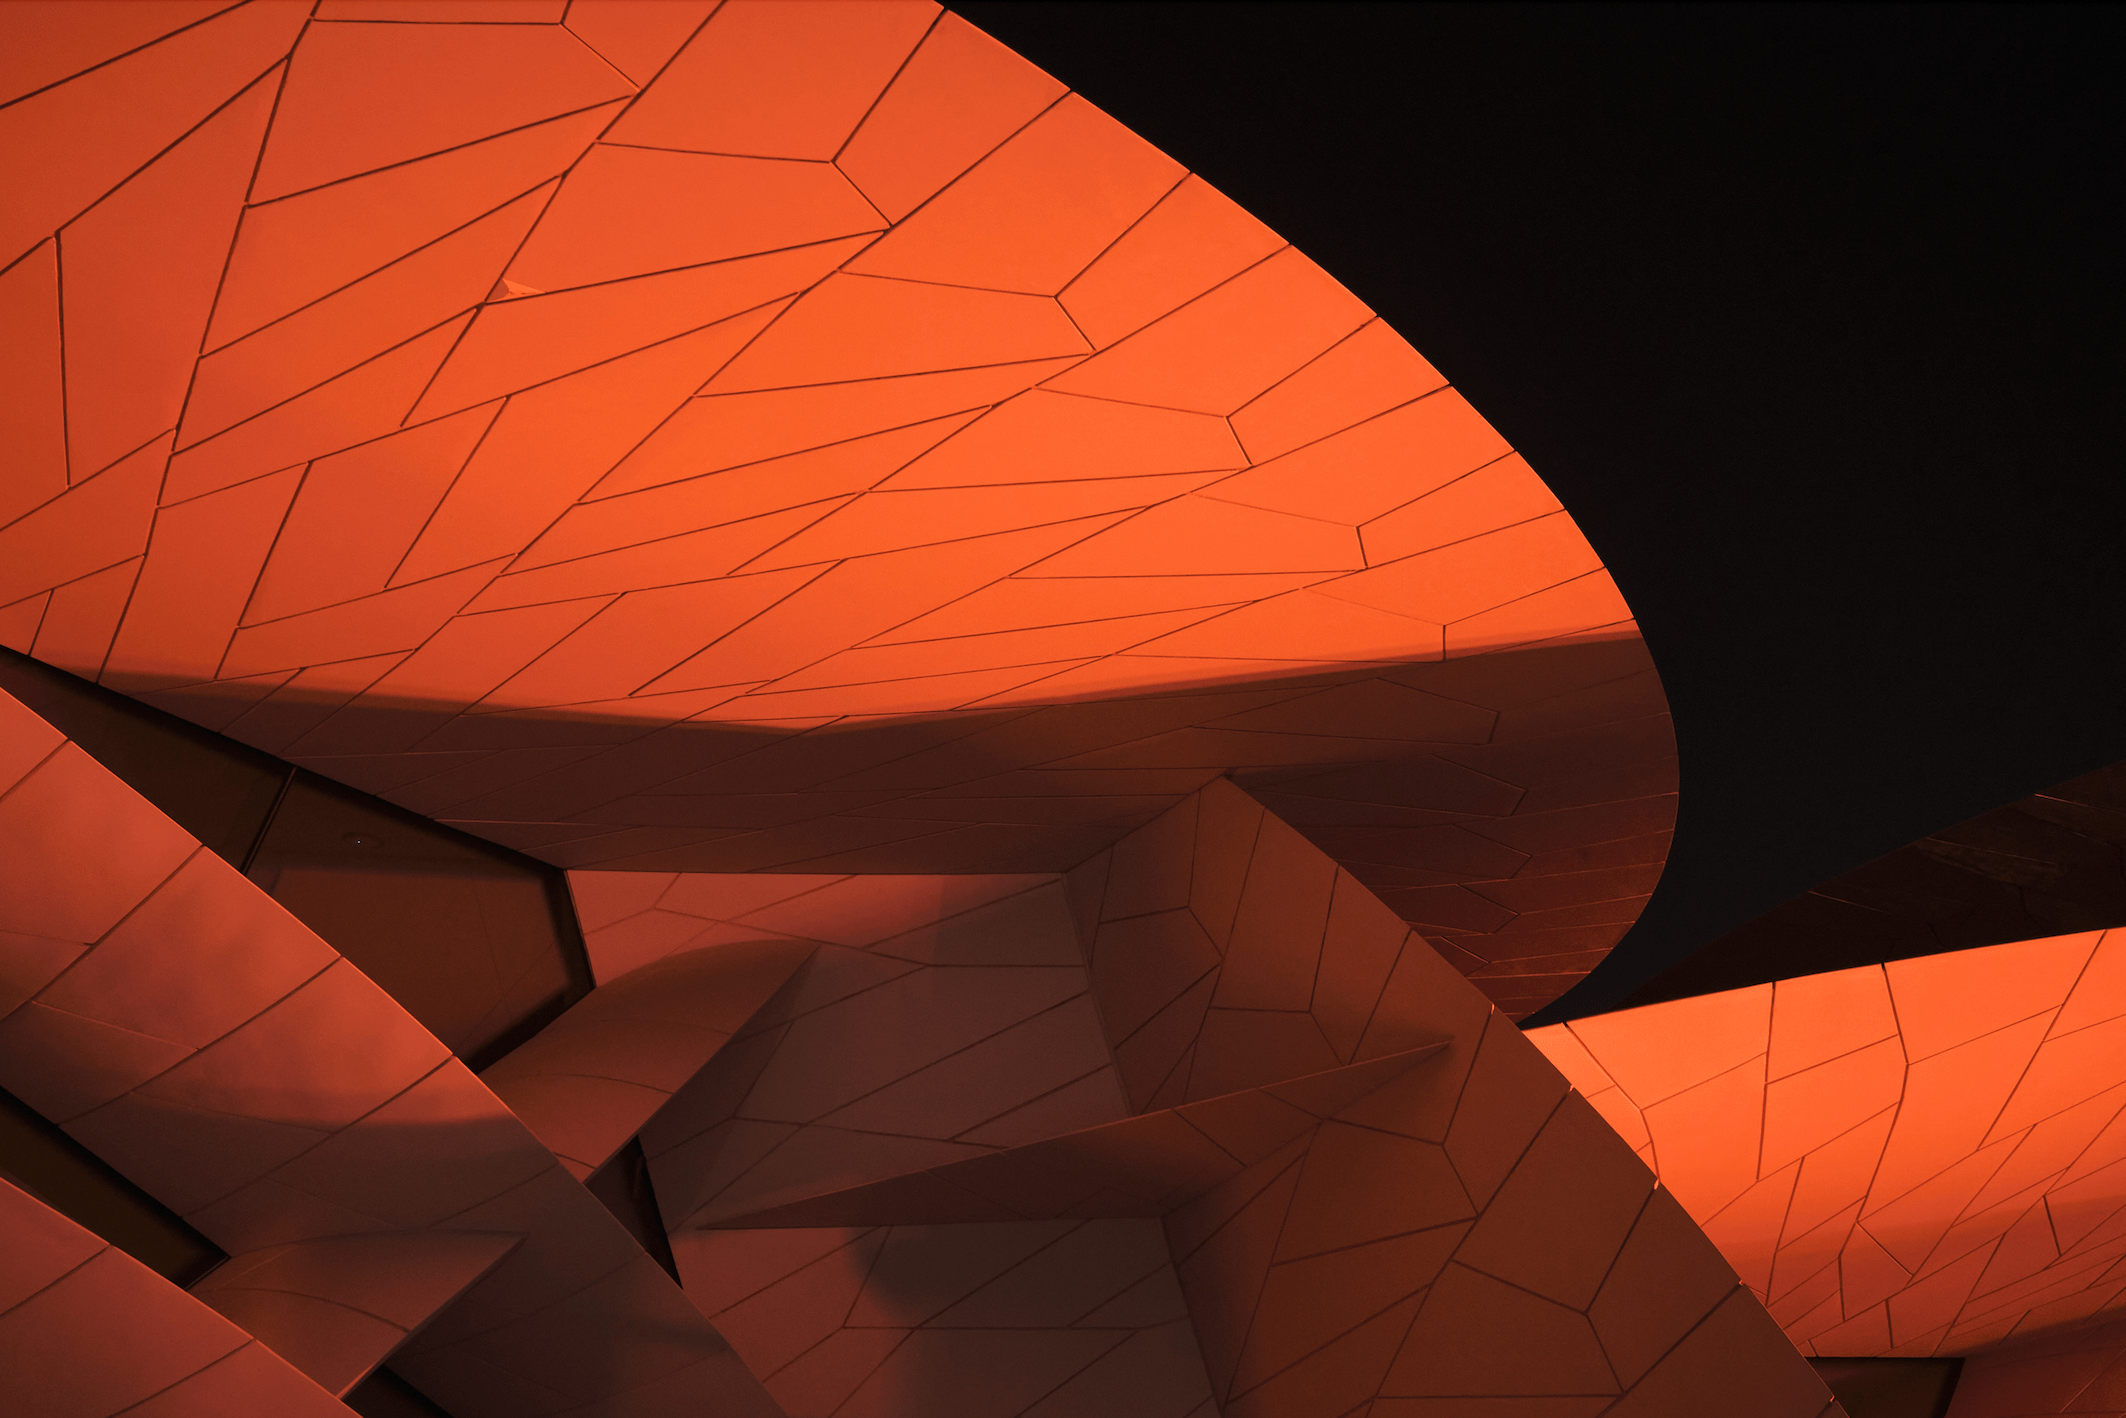 Details of the National Museum of Qatar designed by Jean Nouvel, illuminated from below with red lighting at night.